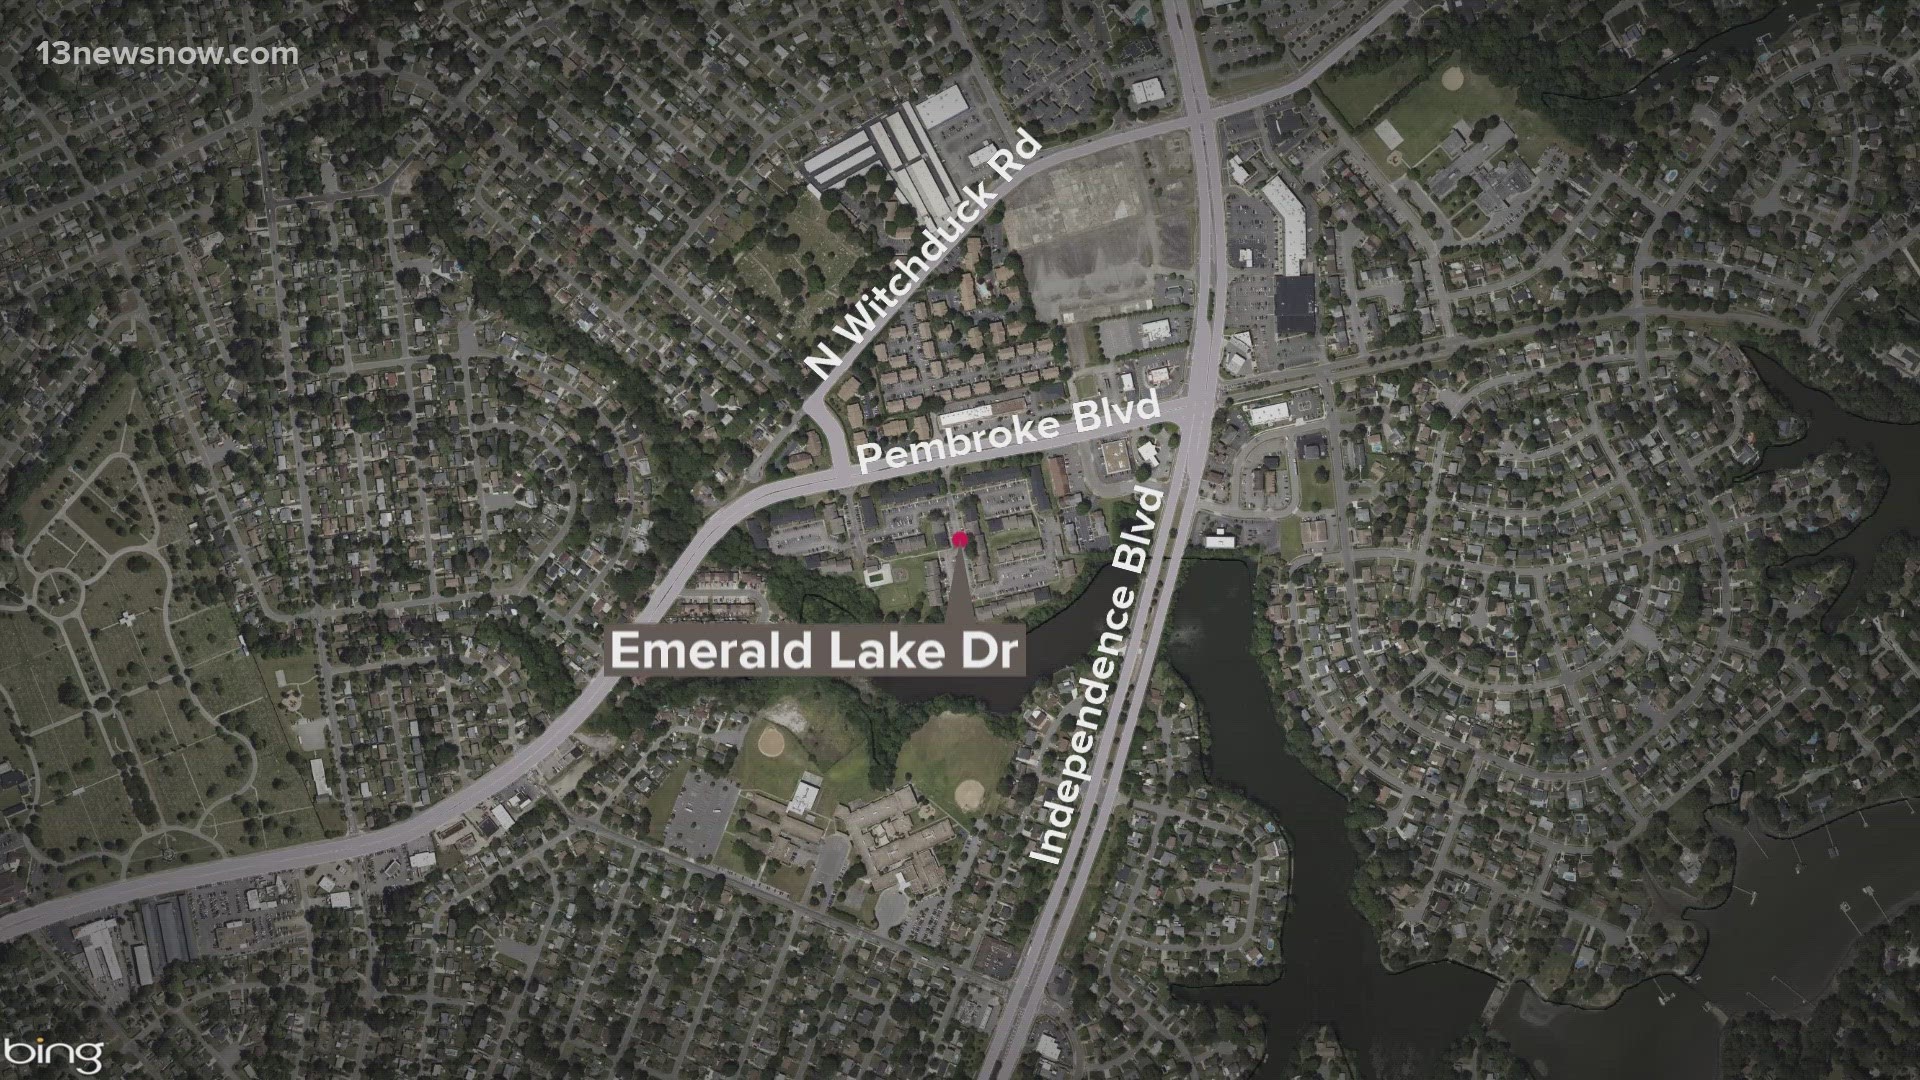 A fire that happened Friday morning on Emerald Lake Drive at the Pembroke Lake Apartments has displaced two adults and a child.